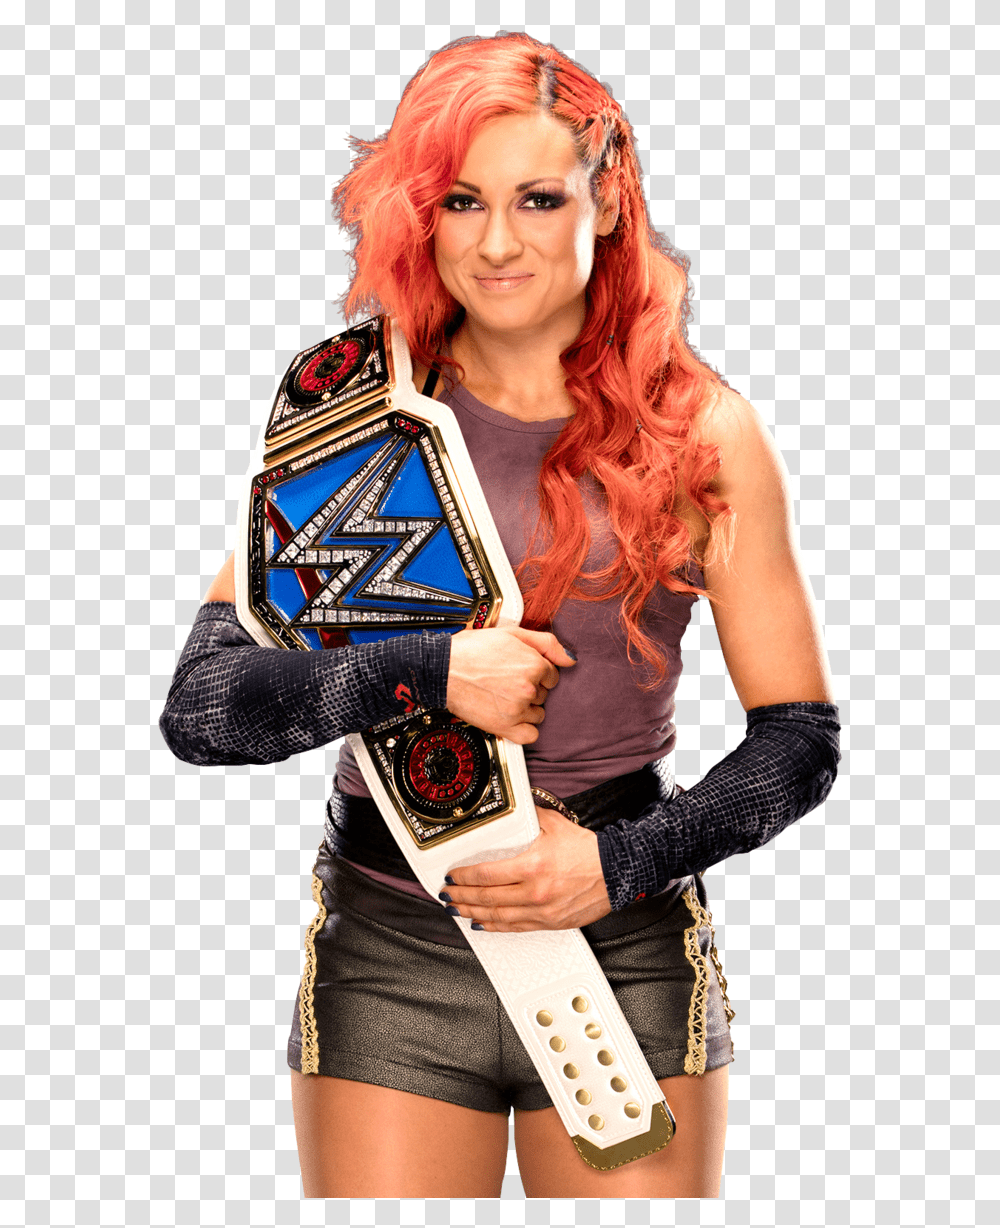 Wwe Women's Champion Becky Lynch, Costume, Person, Cosplay, Wristwatch Transparent Png